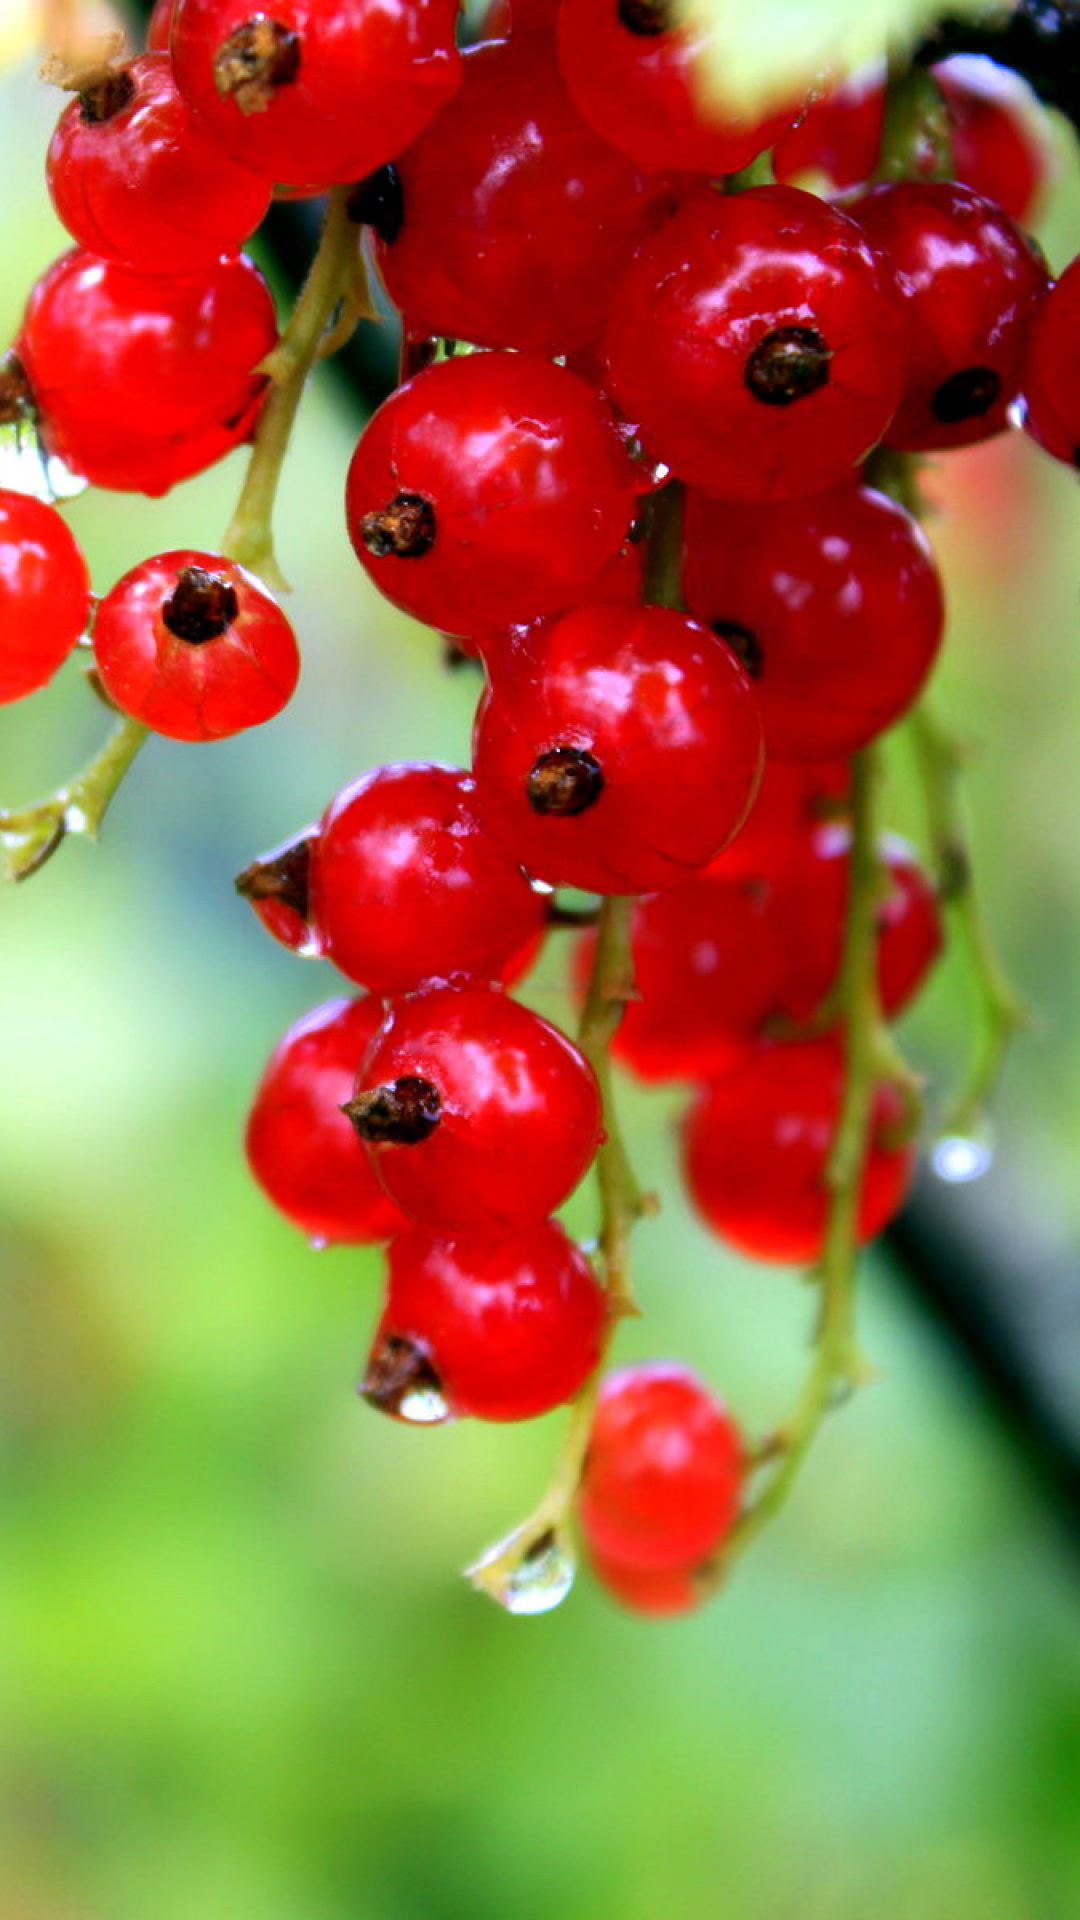 Red currant with Dew screenshot #1 1080x1920